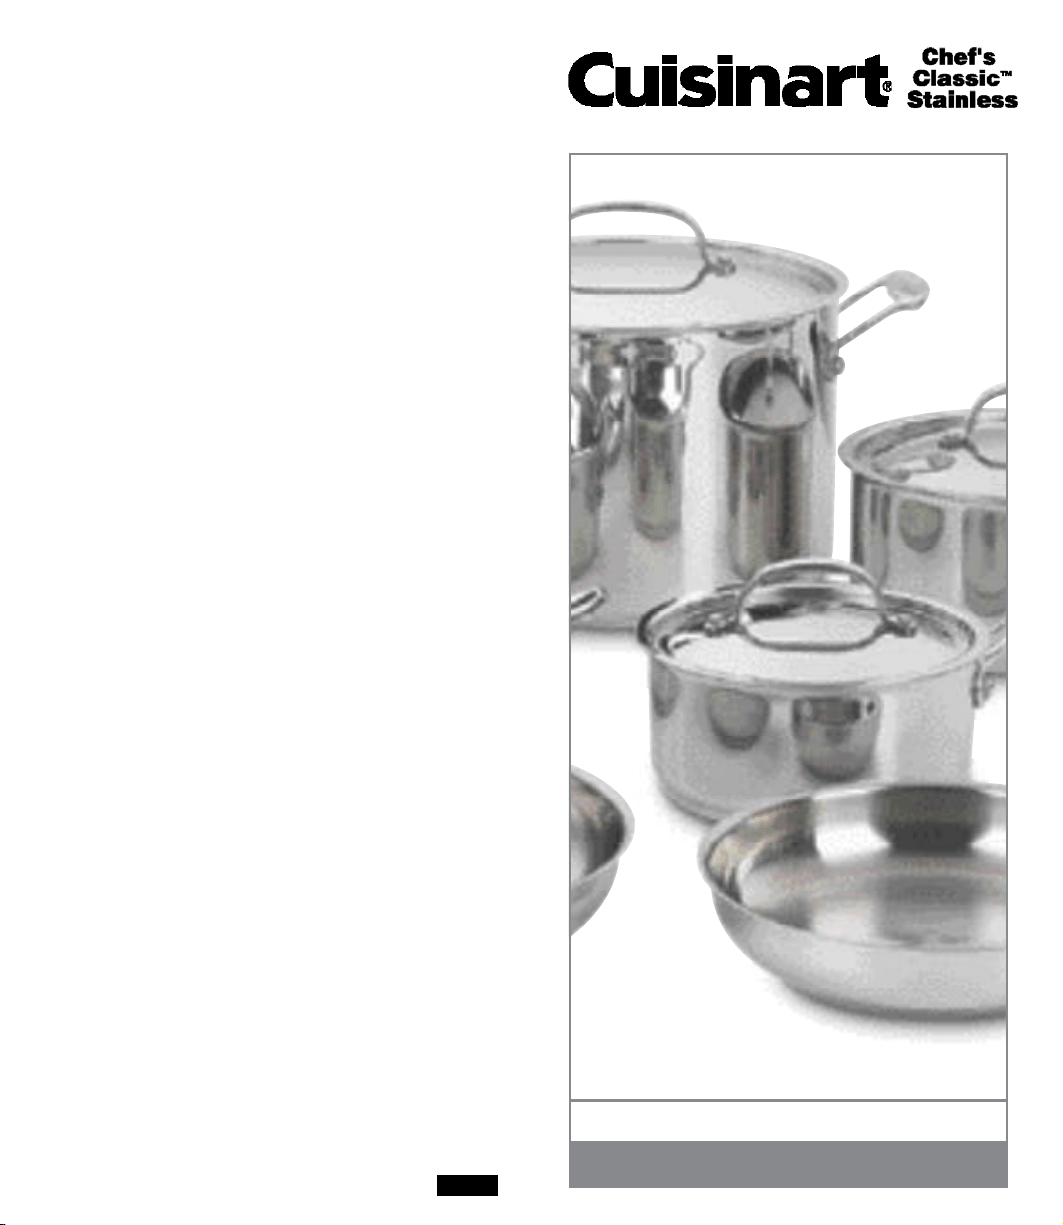 Cuisinart 7194-20 Chef's Classic Stainless 4-Quart Saucepan with Cover